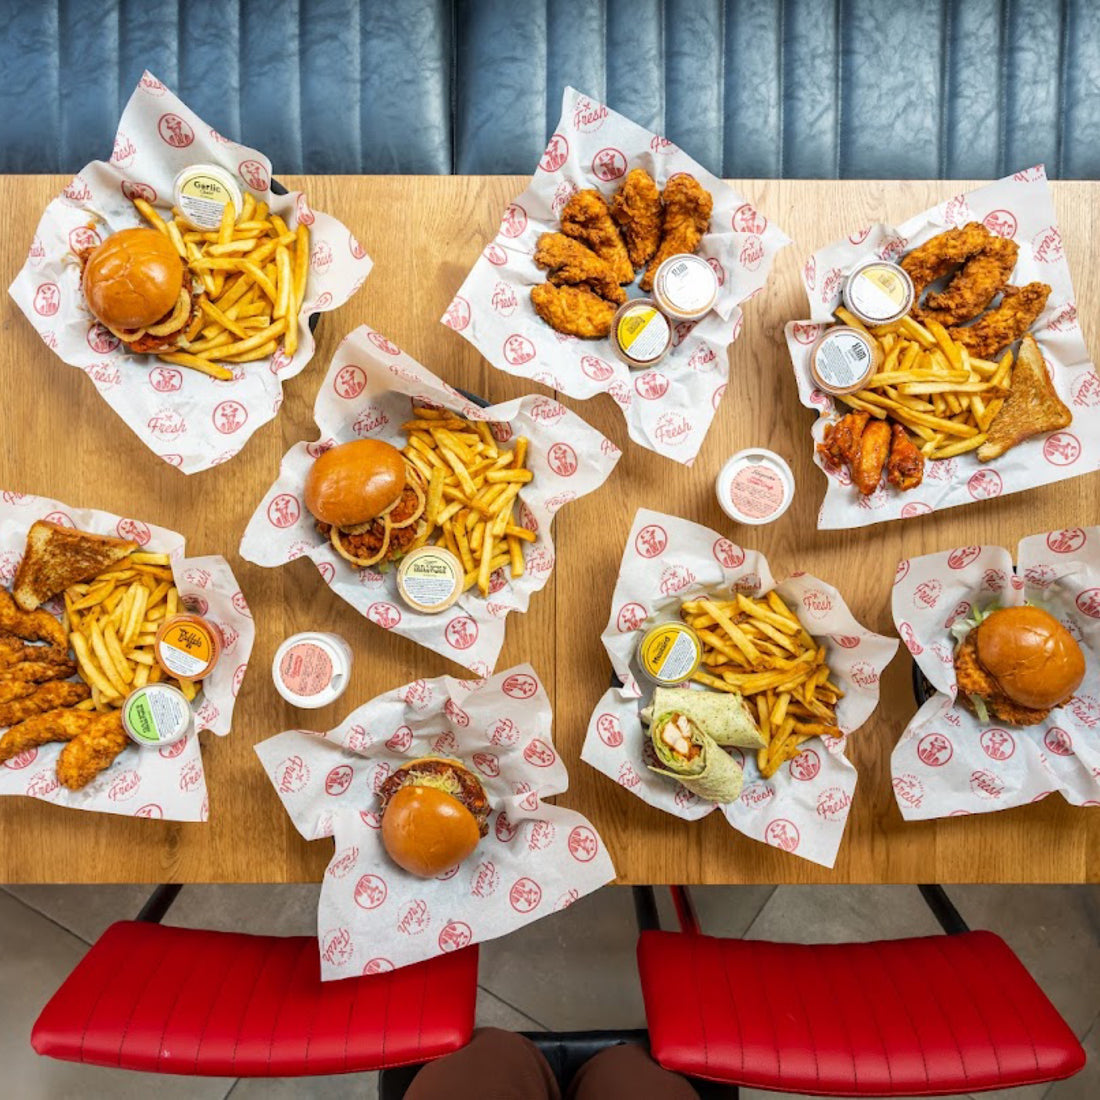 US brand Slim Chickens is coming to Belfast’s Boucher Square